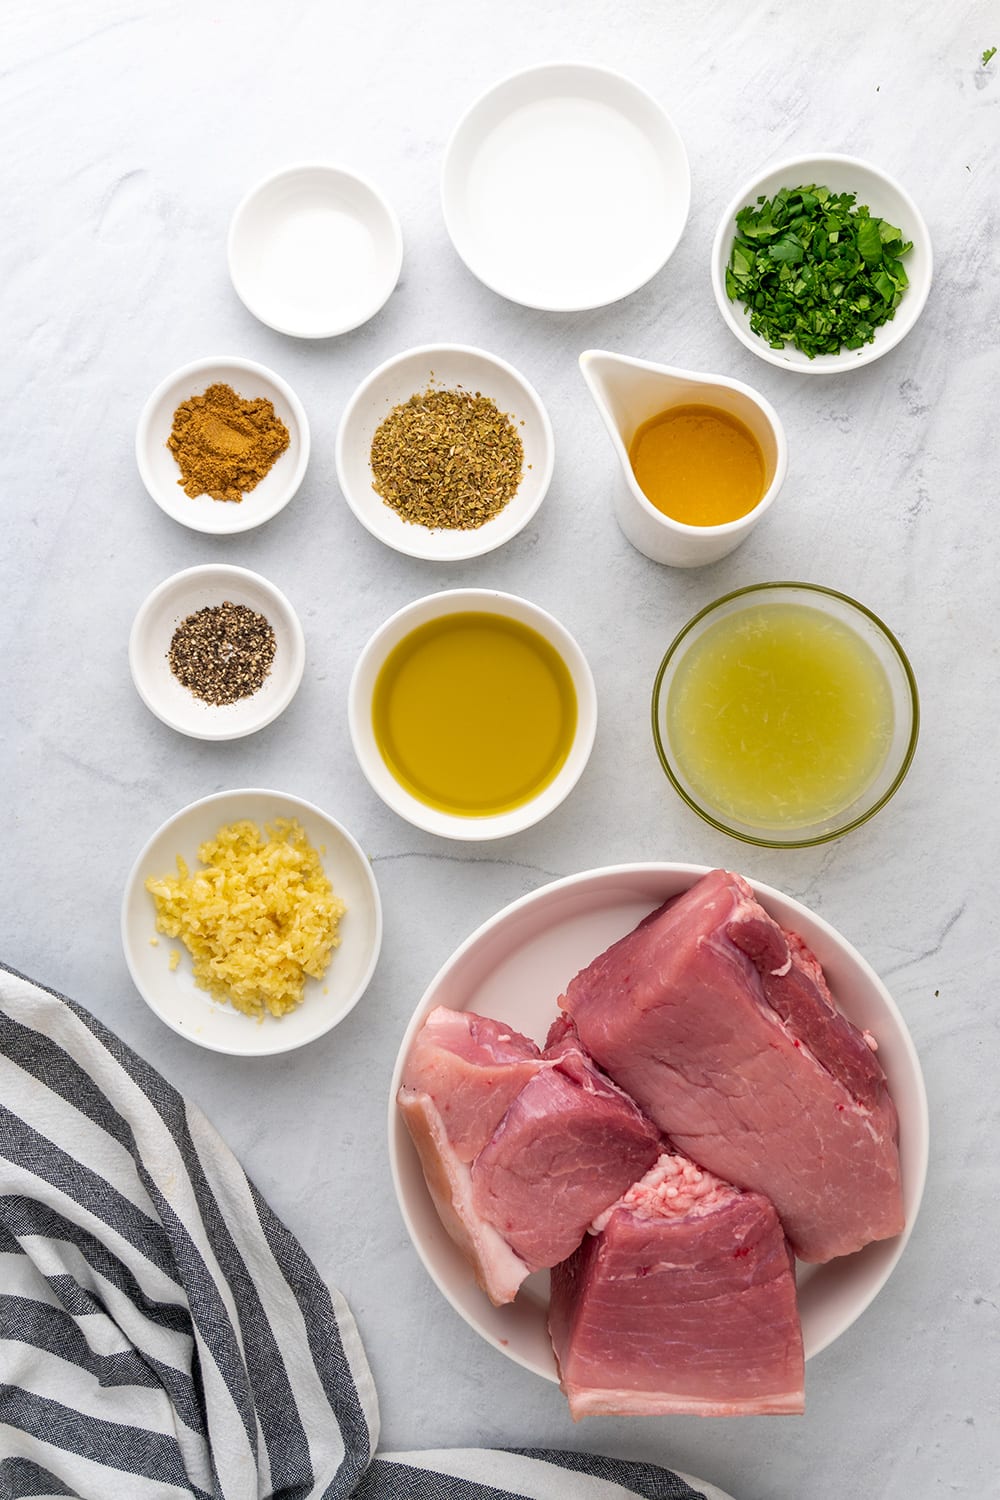 Ingredients for Instant Pot Mojo Pork & Cuban Sandwiches